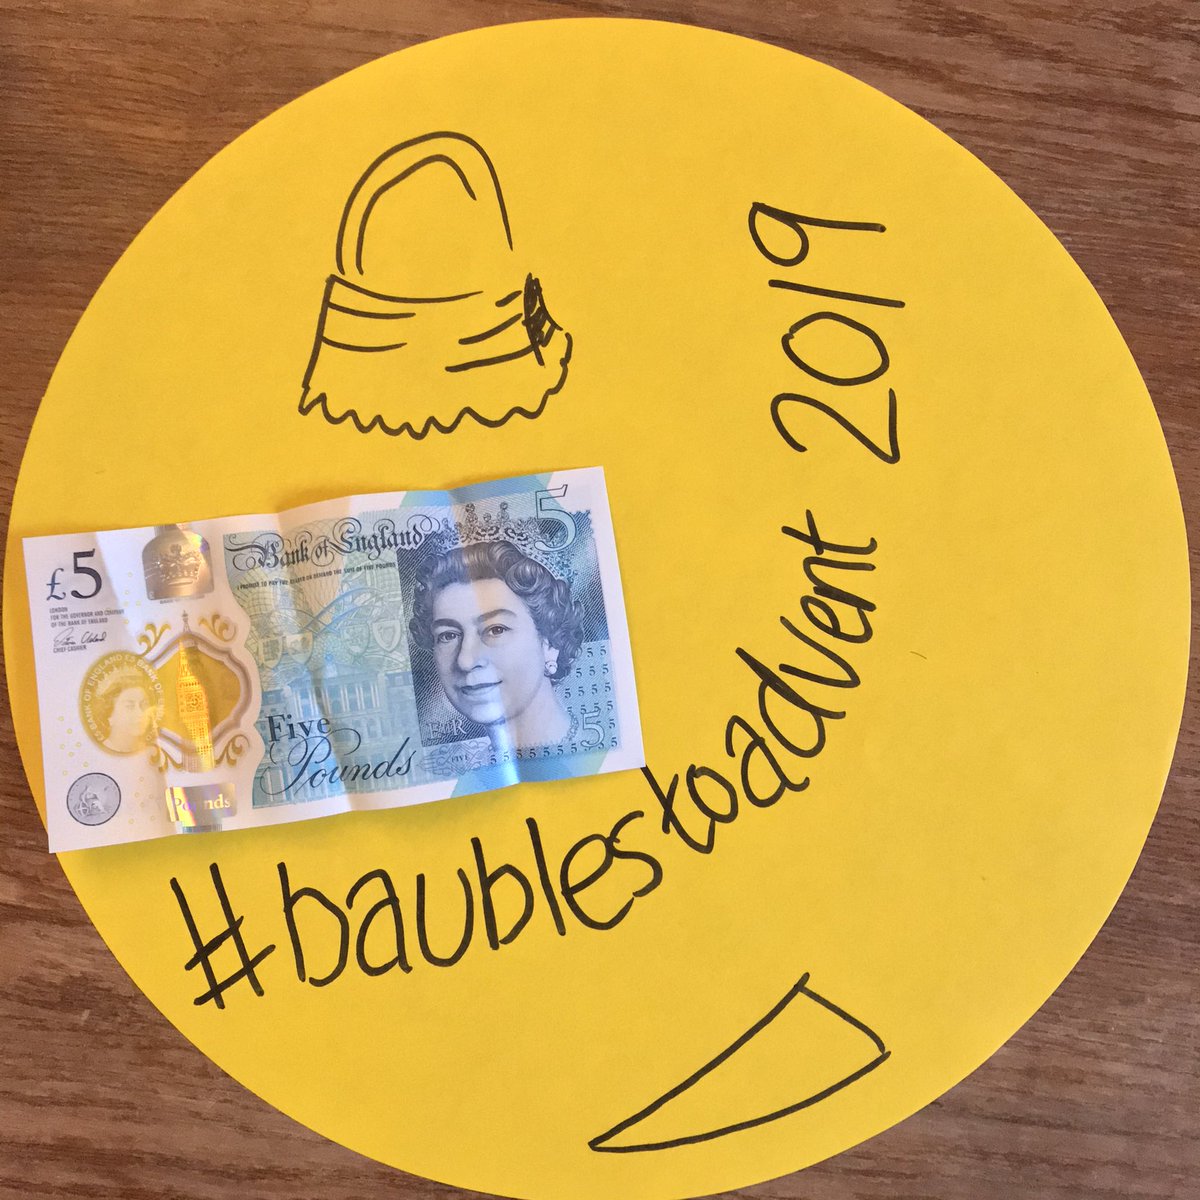 Oxford has always been a tale of two cities - those who live in the shadow of the dreaming spires need your help. Oxford Community Emergency Foodbank is doing the work - can you spare some cash to help? For more information visit:  http://www.cefoxford.co.uk/donate.asp  #BaublesToAdvent2019